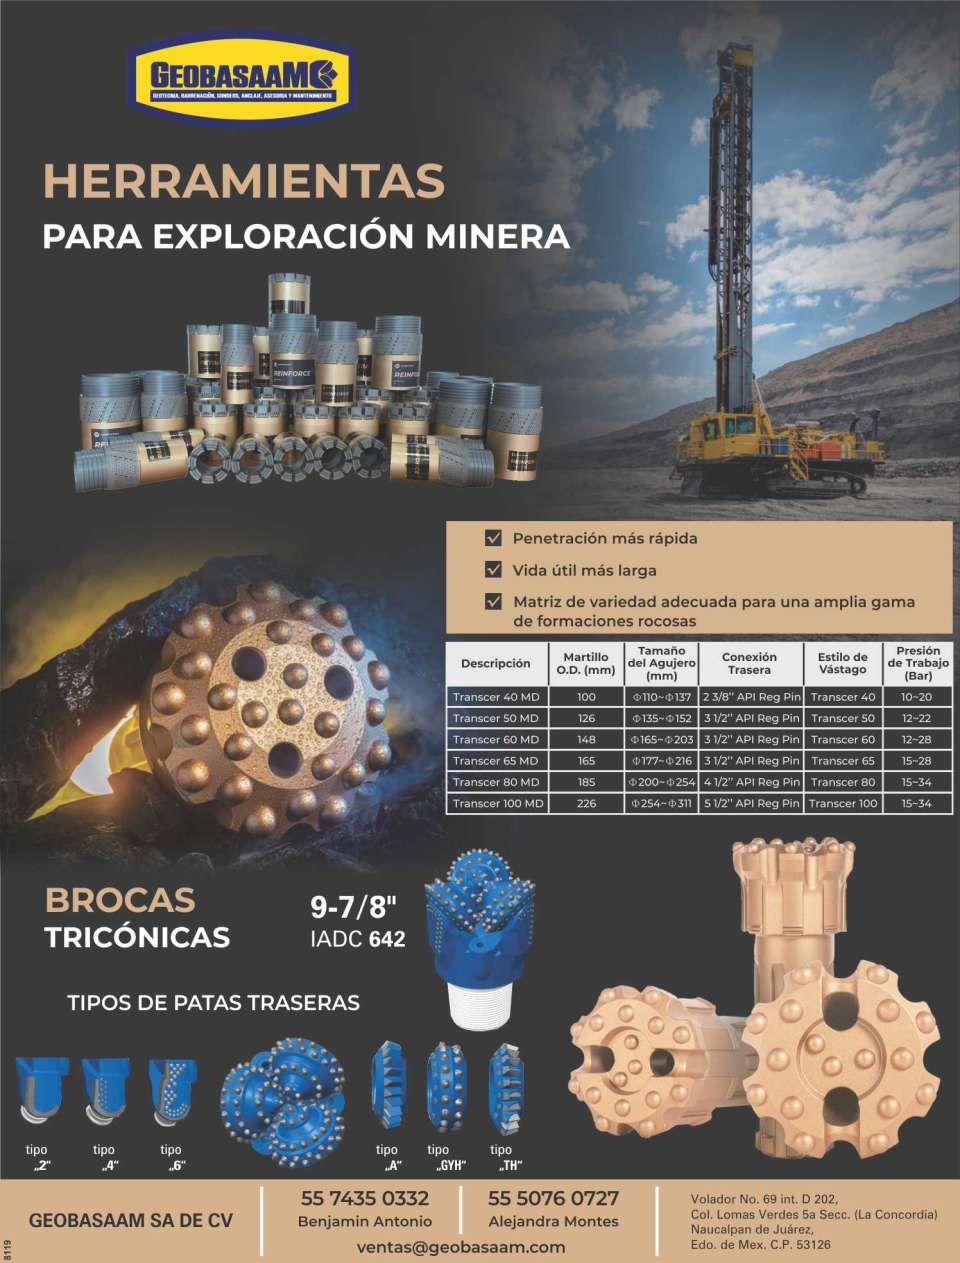 Tools for Mining Exploration, Tricone Bits IADC 642. Drilling Tool, Geotechnics, Drilling, Probing, Anchoring, Consulting and Maintenance.